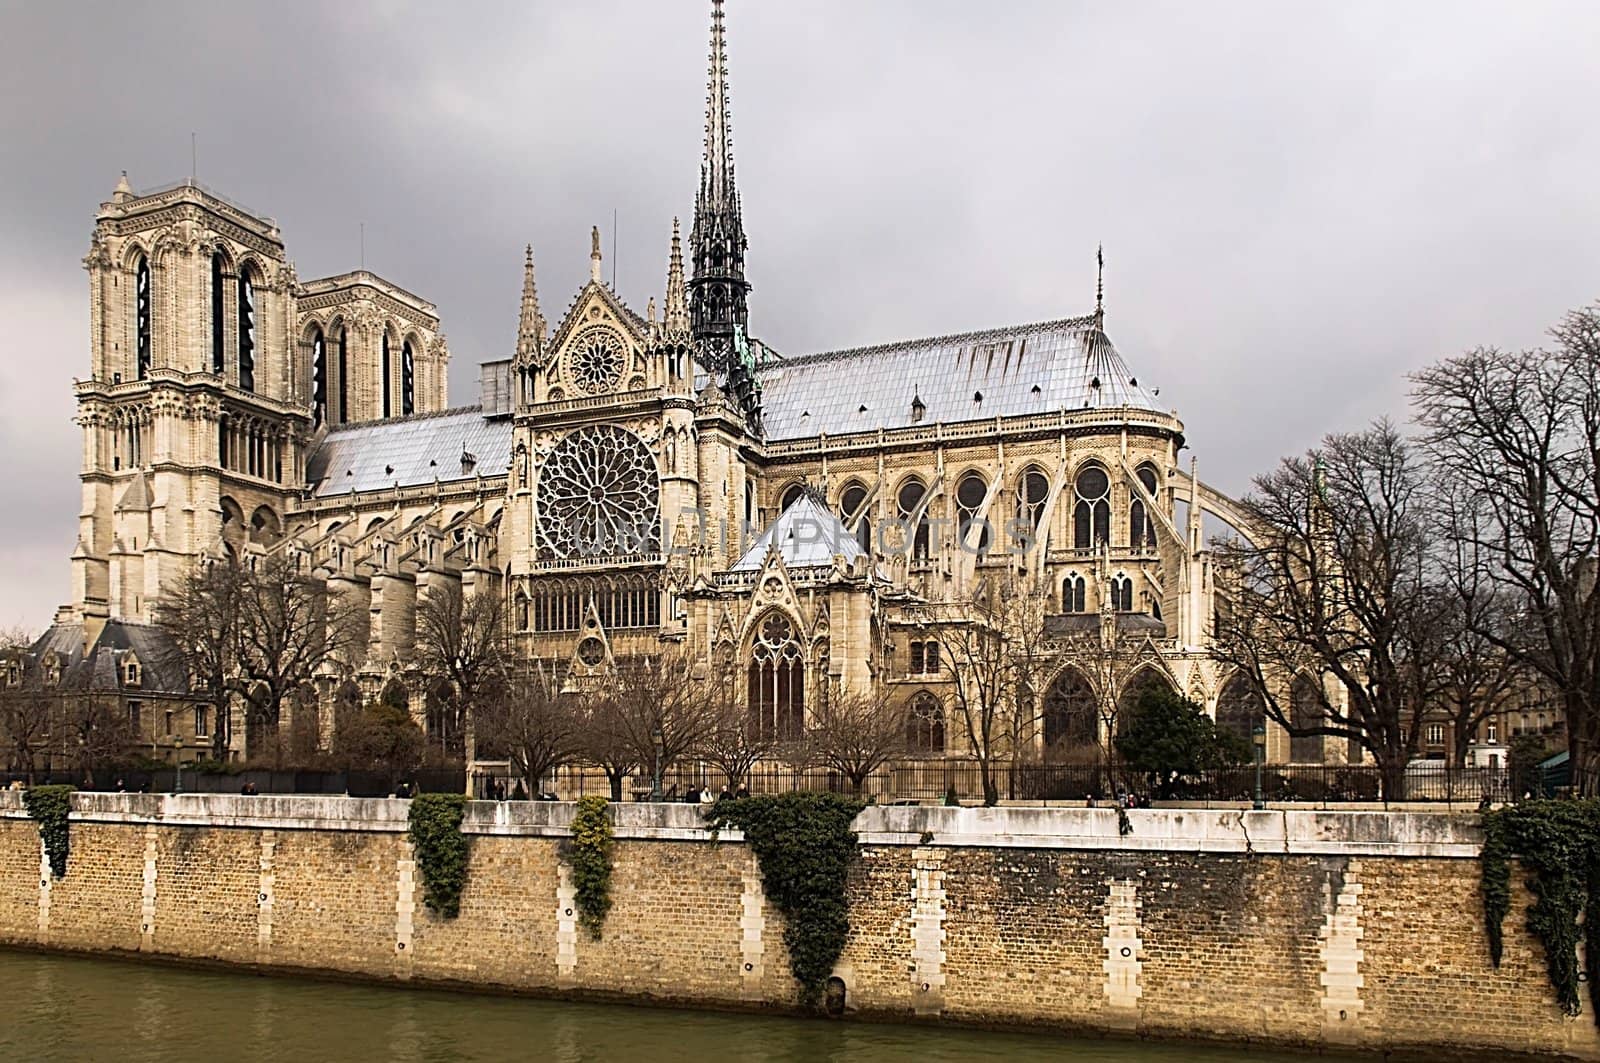 Notre-Dame de Paris in the early spring. View on the Seine, France